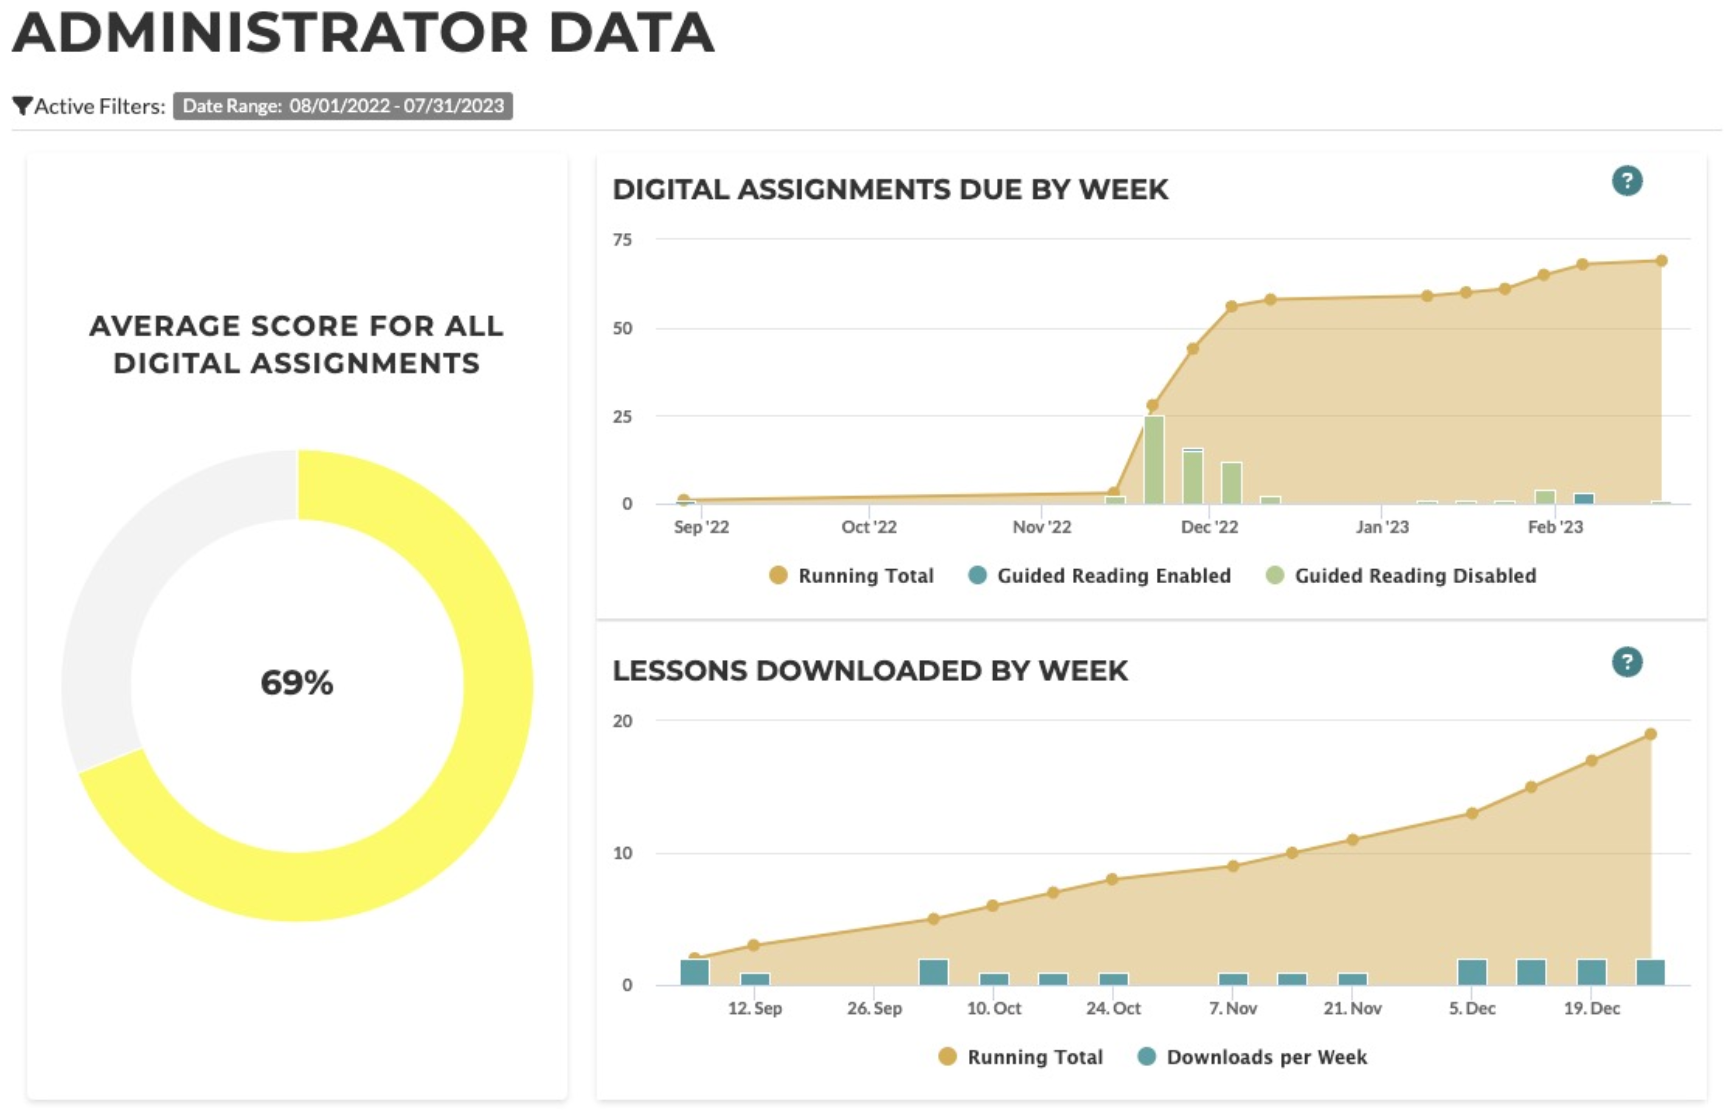 Administrator data display shows average scores for all digital assignments.